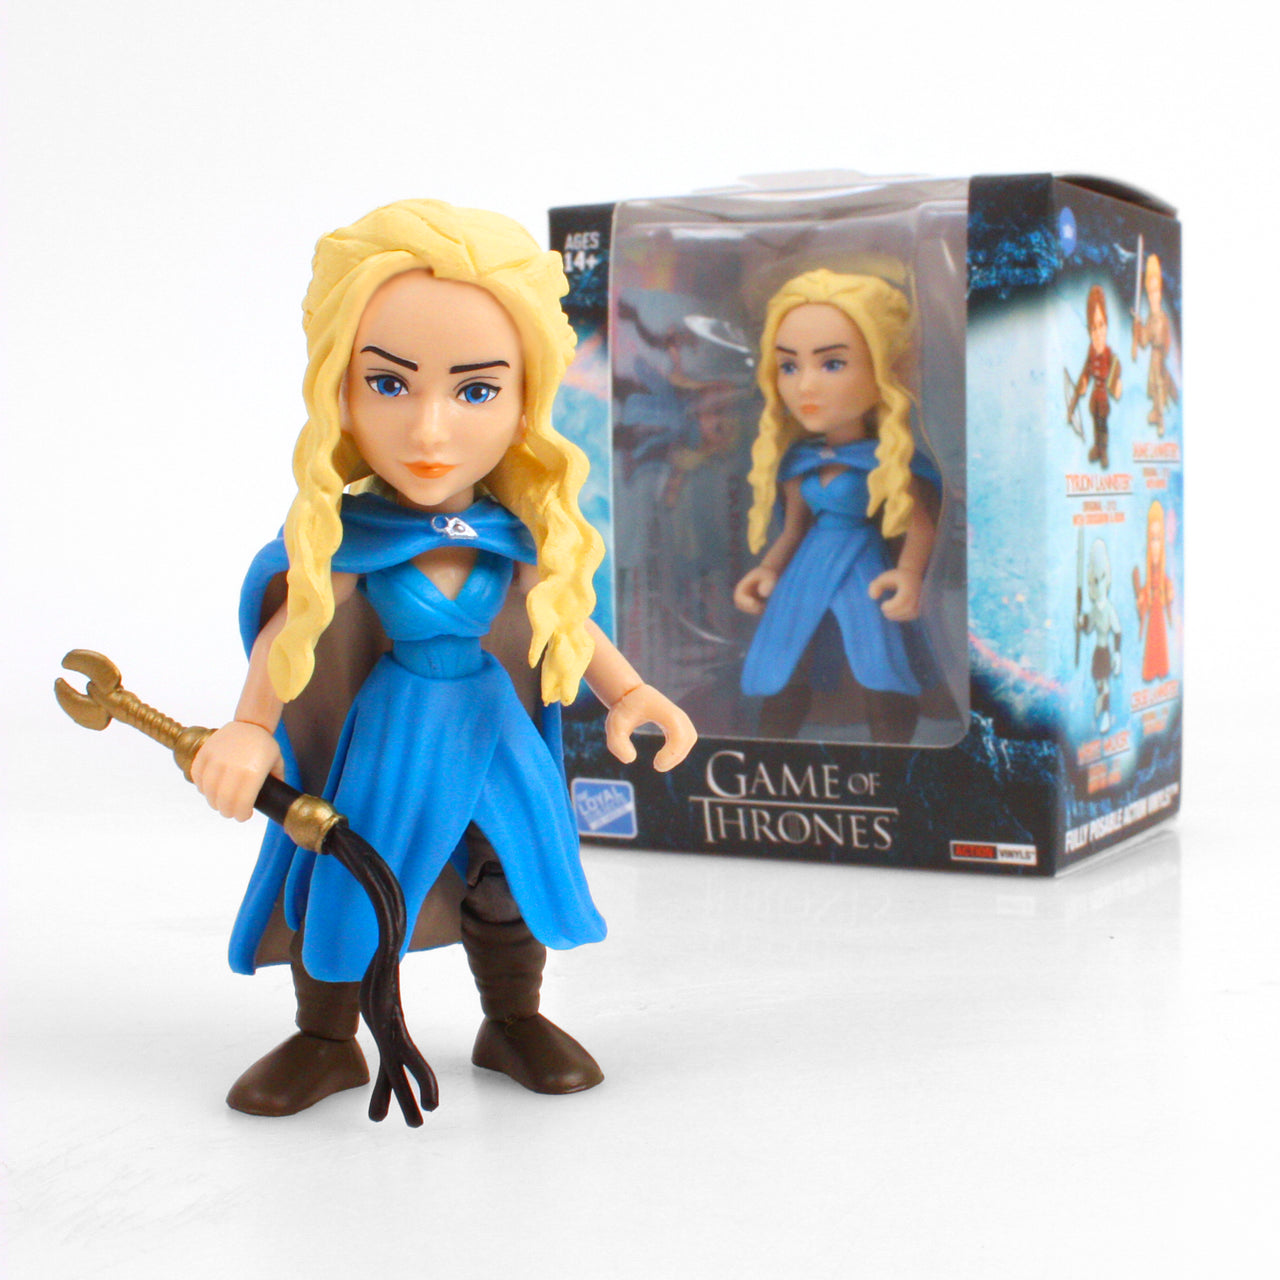 The Loyal Subjects - Game Of Thrones Daenerys Targaryen with Slaver's Whip